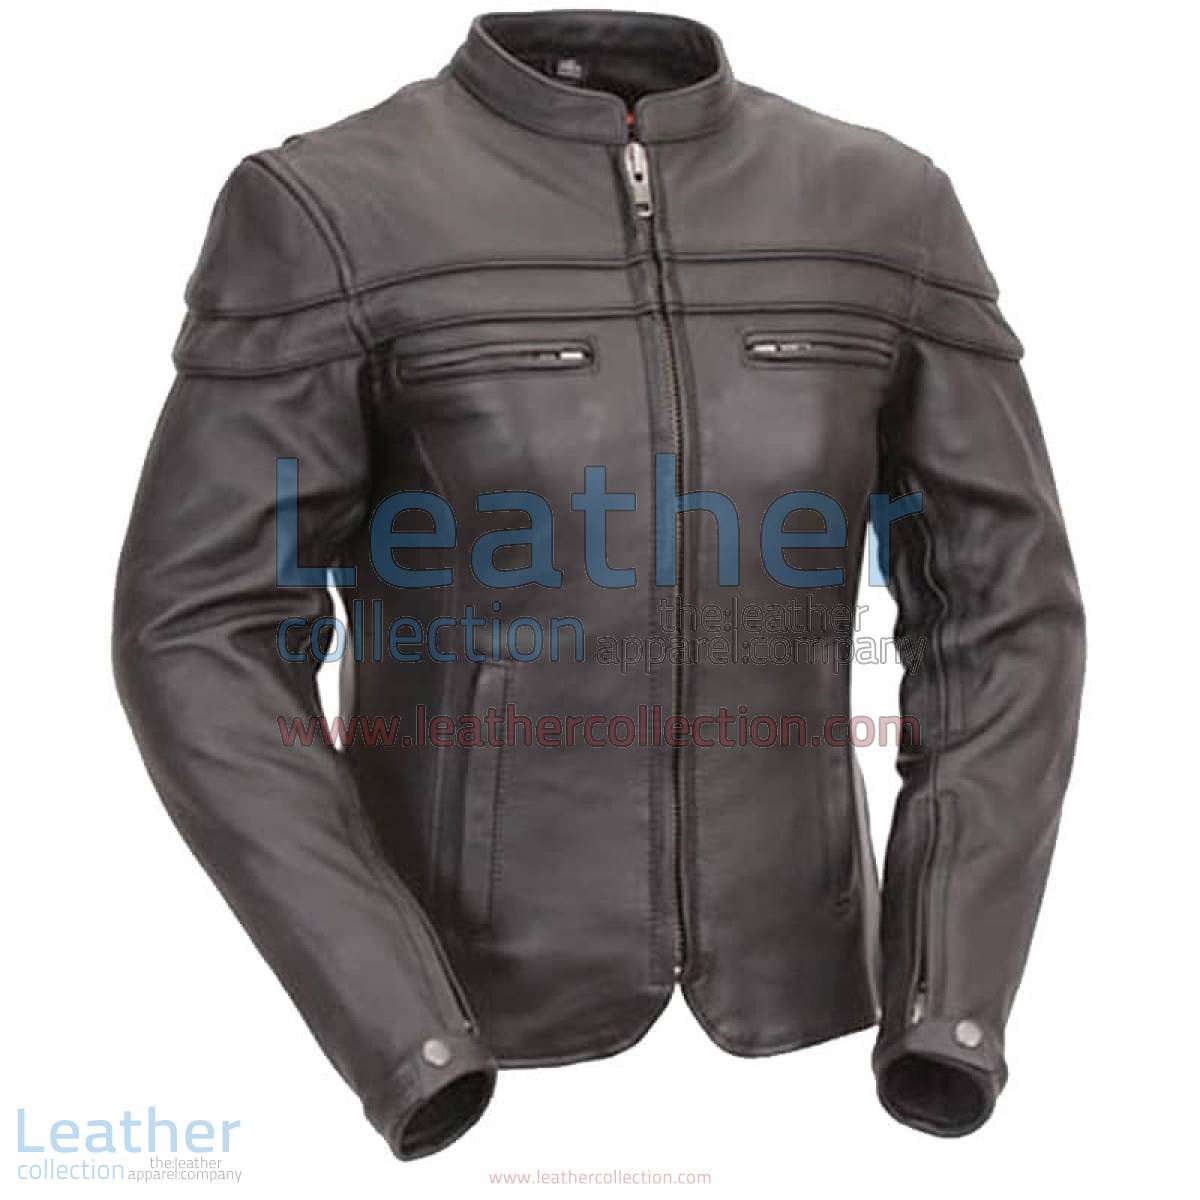 Leather Rider Touring Jacket with Sleeve & Pocket Vents | leather touring jacket